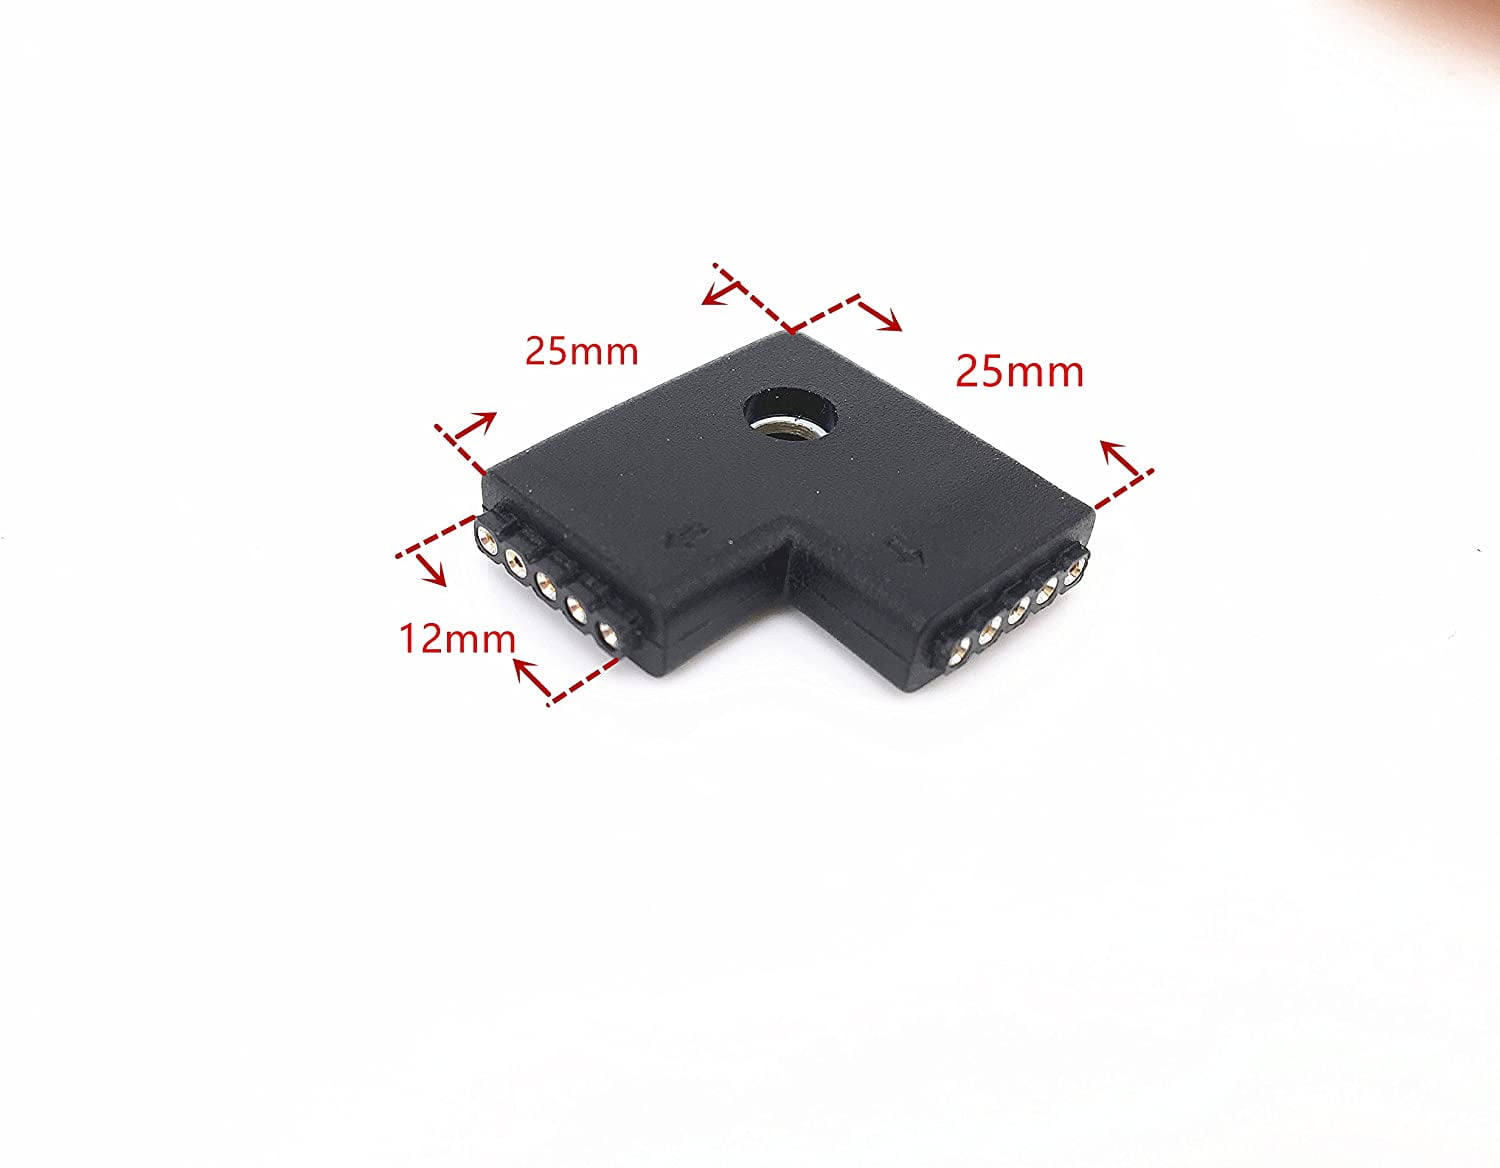 5-pins Black 12mm L-Shape 90 Degree Right Angle Female Connector for LED RGBW 5050 Flex Strip Light ，rgbw Right Angle，l Shape 5 pins Connector HUALAN HL-72 L Shape 